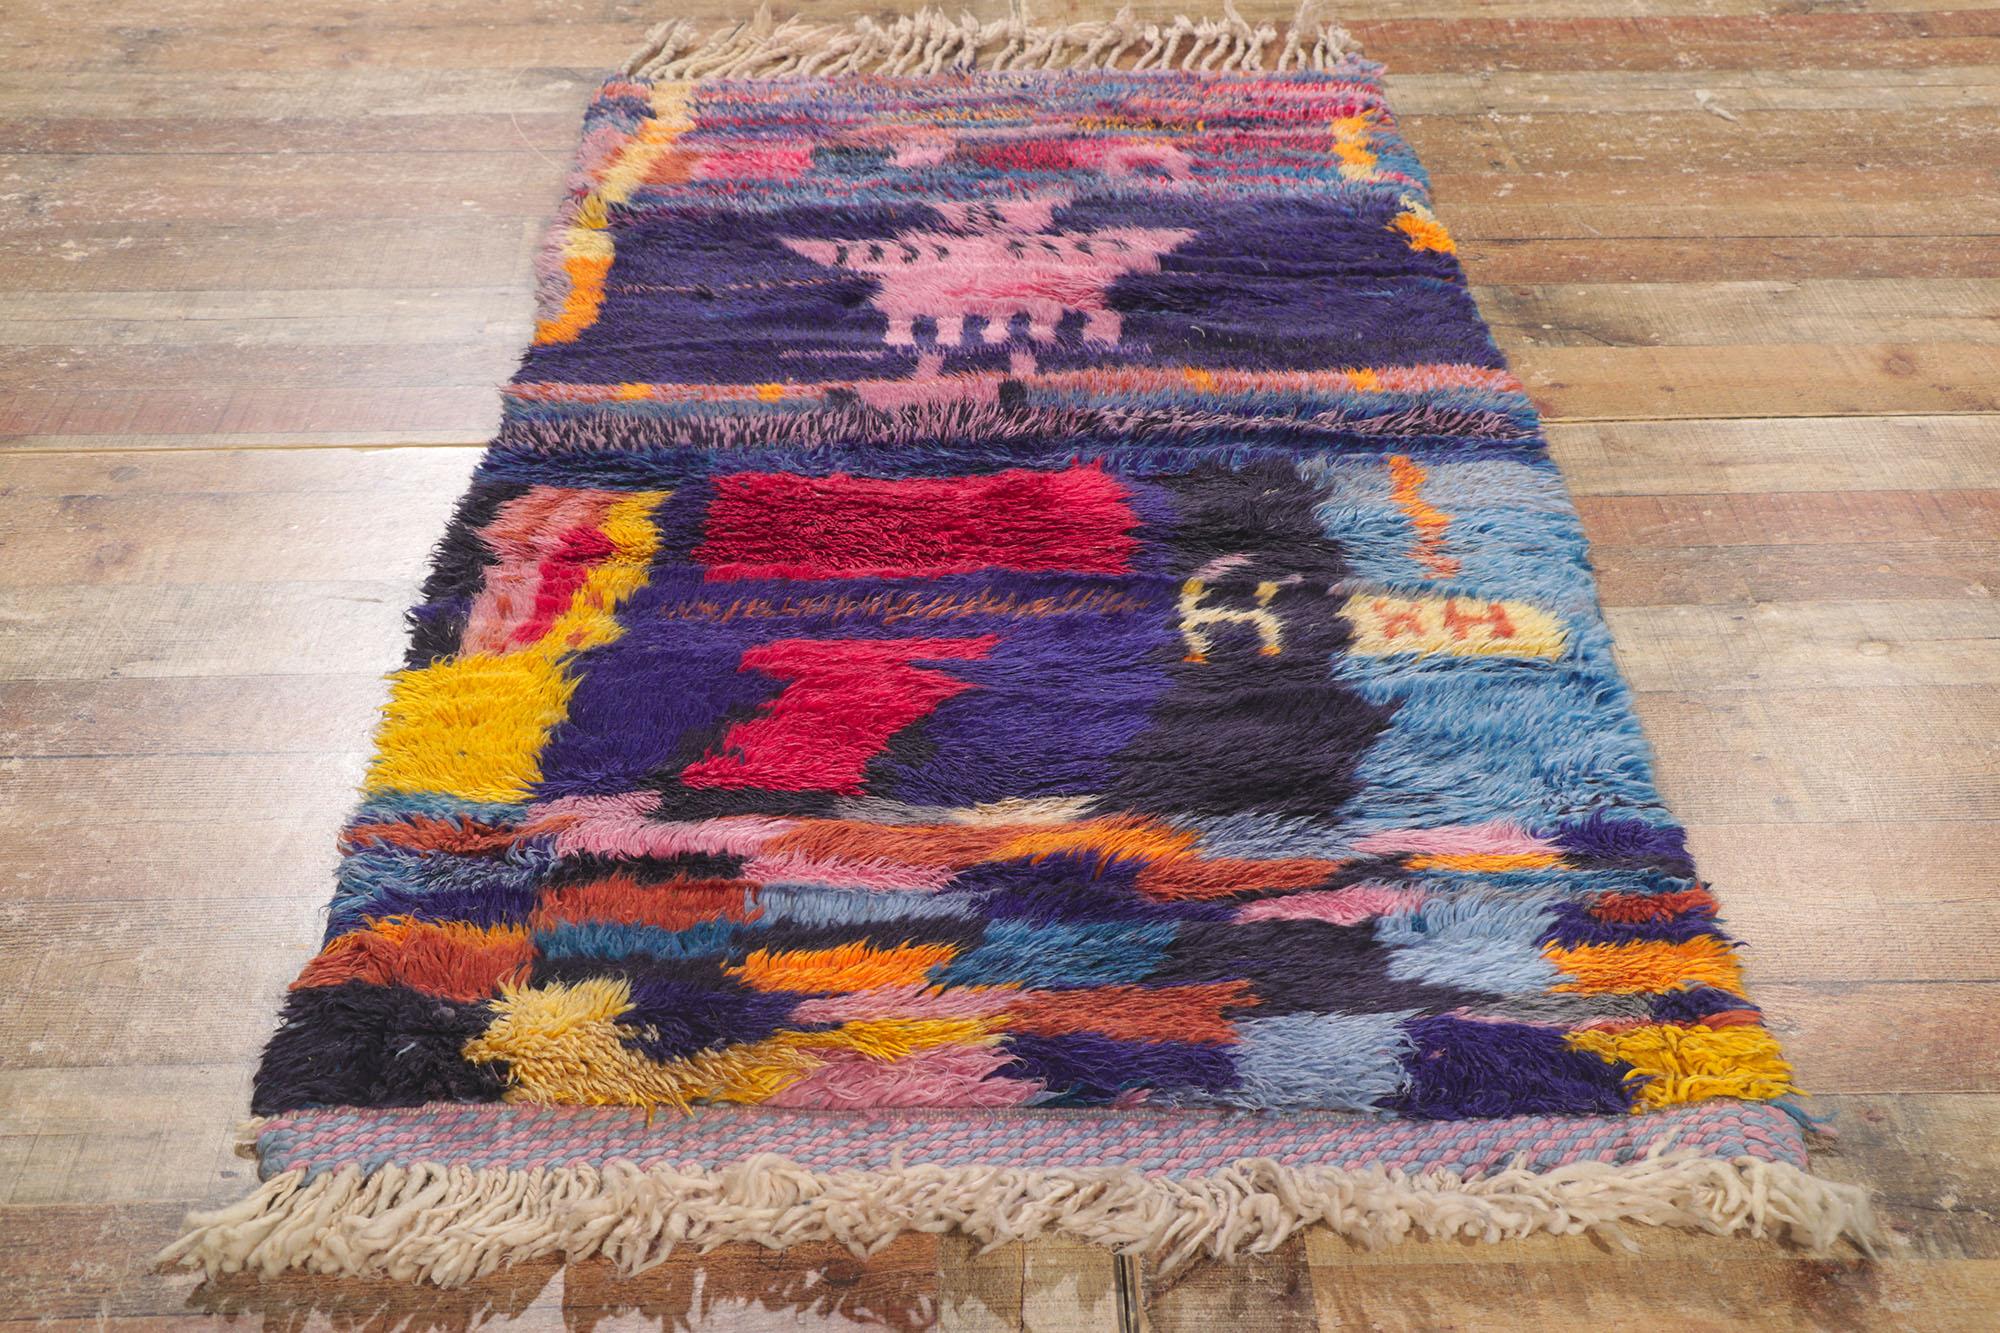 Contemporary Colorful Beni Ourain Moroccan Rug by Berber Tribes of Morocco For Sale 1